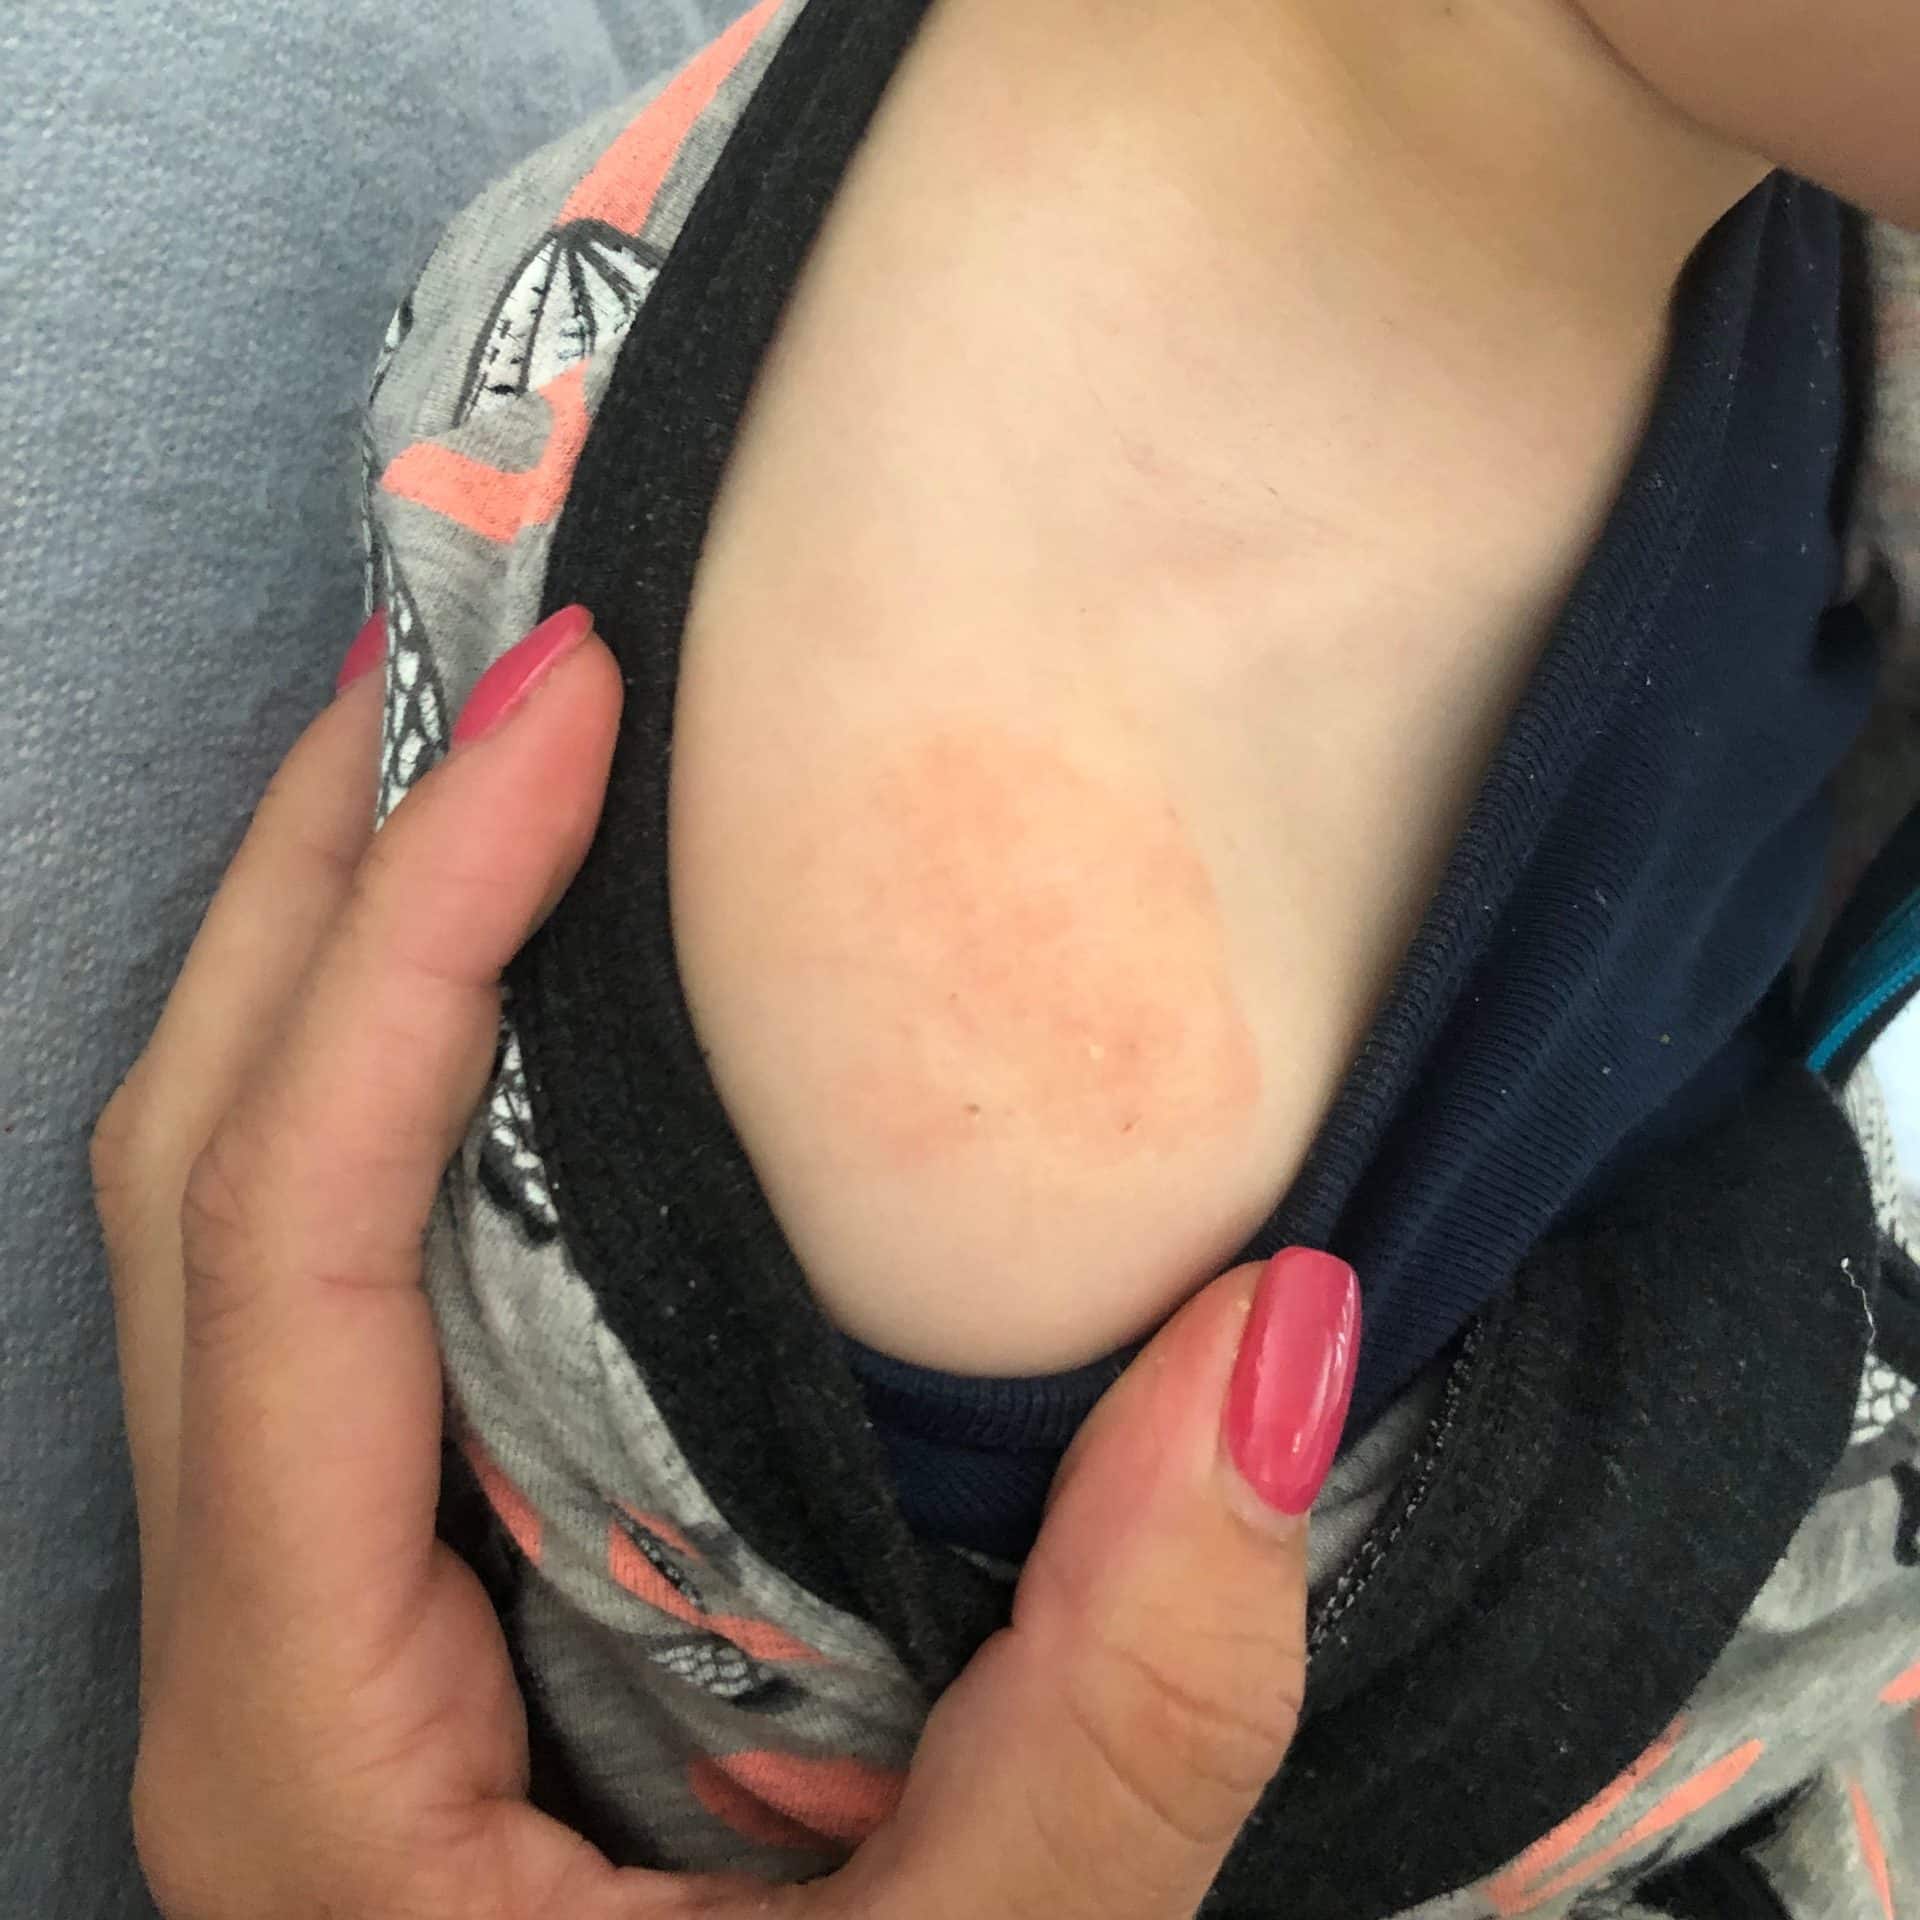 My baby/child has Eczema, What can I do to help?